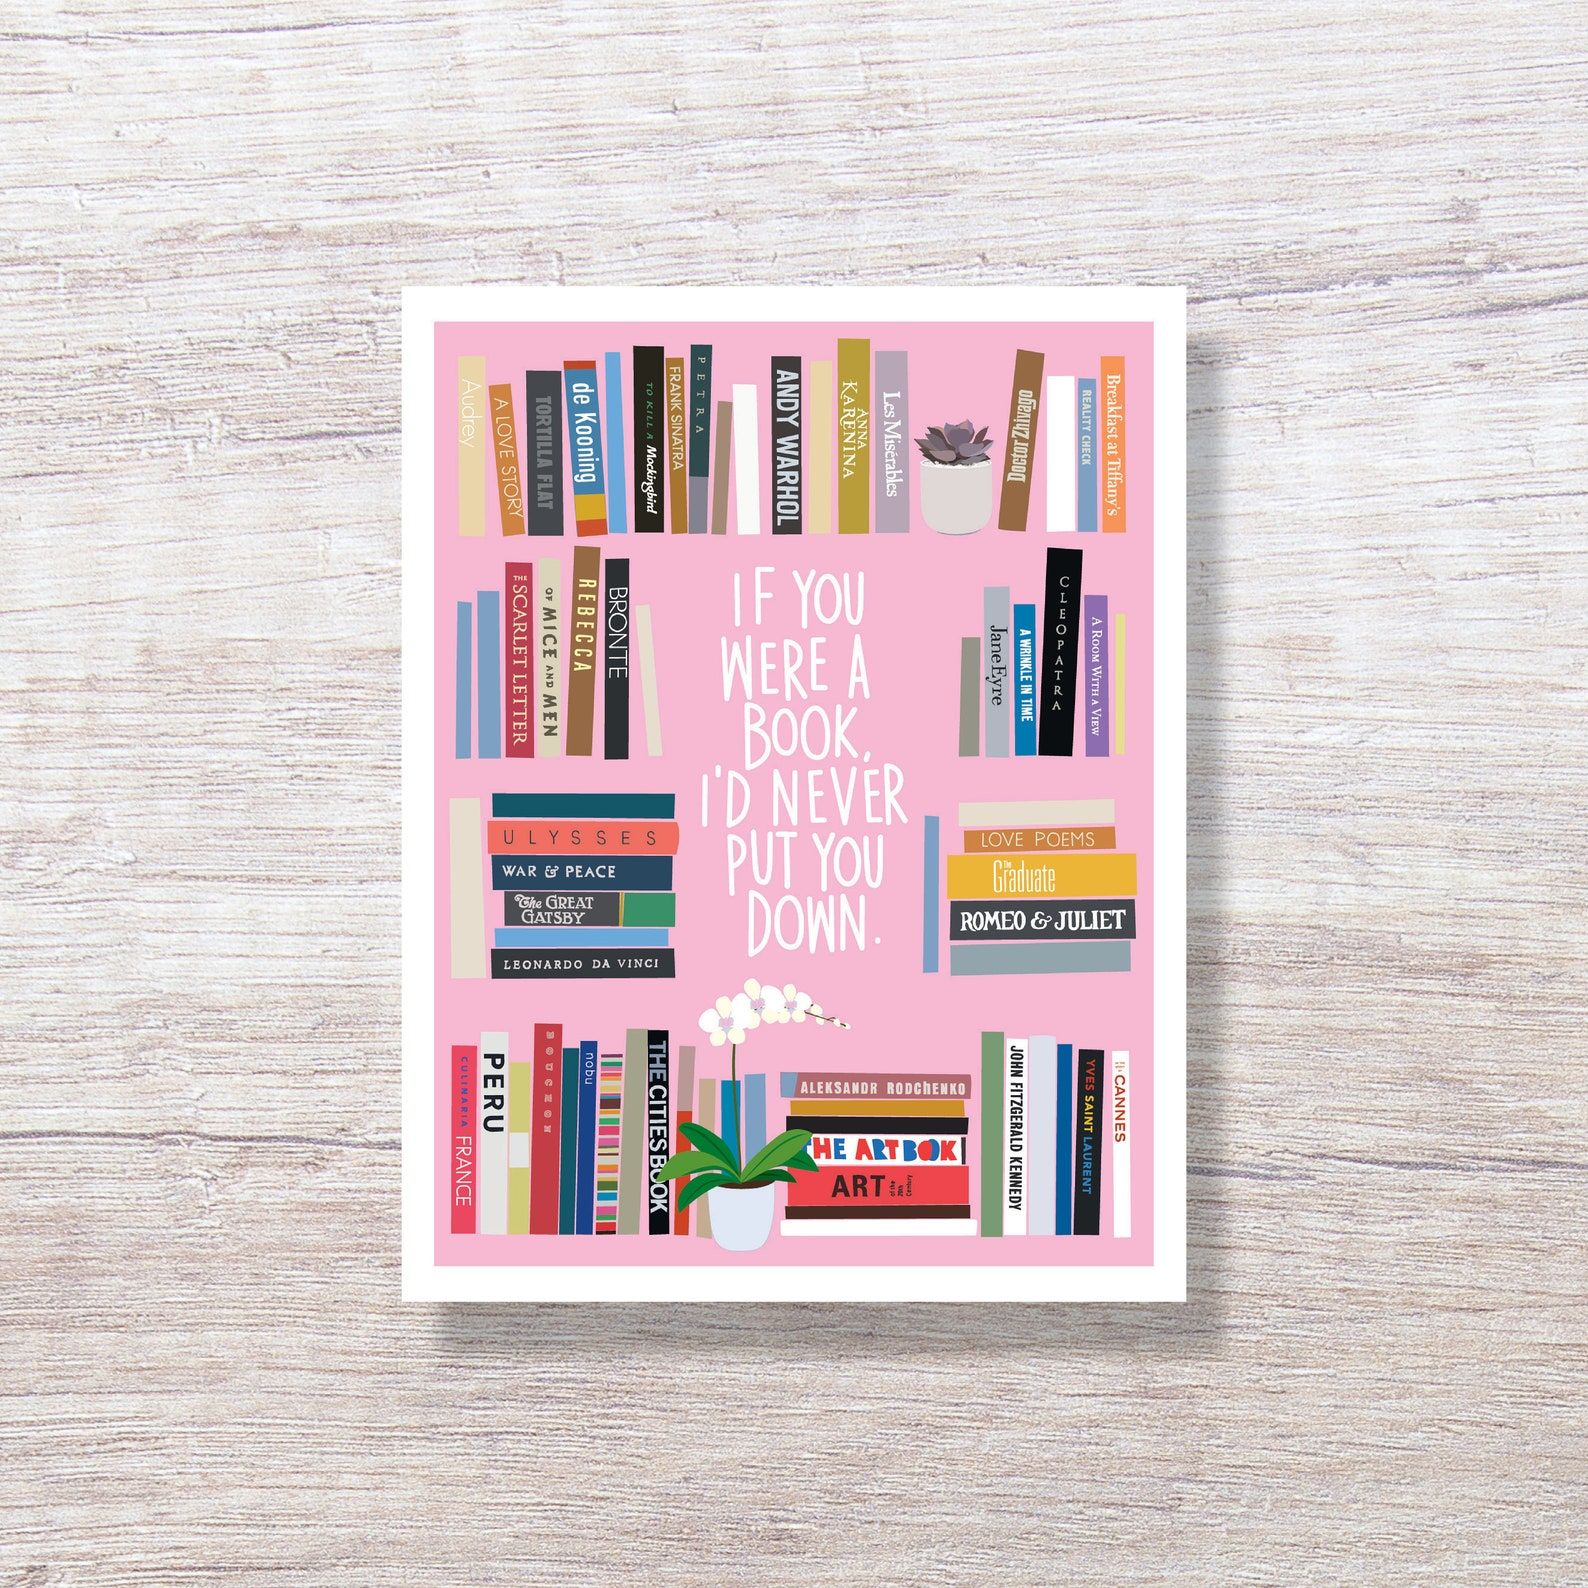 a pink card with book stacks that reads "If you were a book, I'd never put you down"